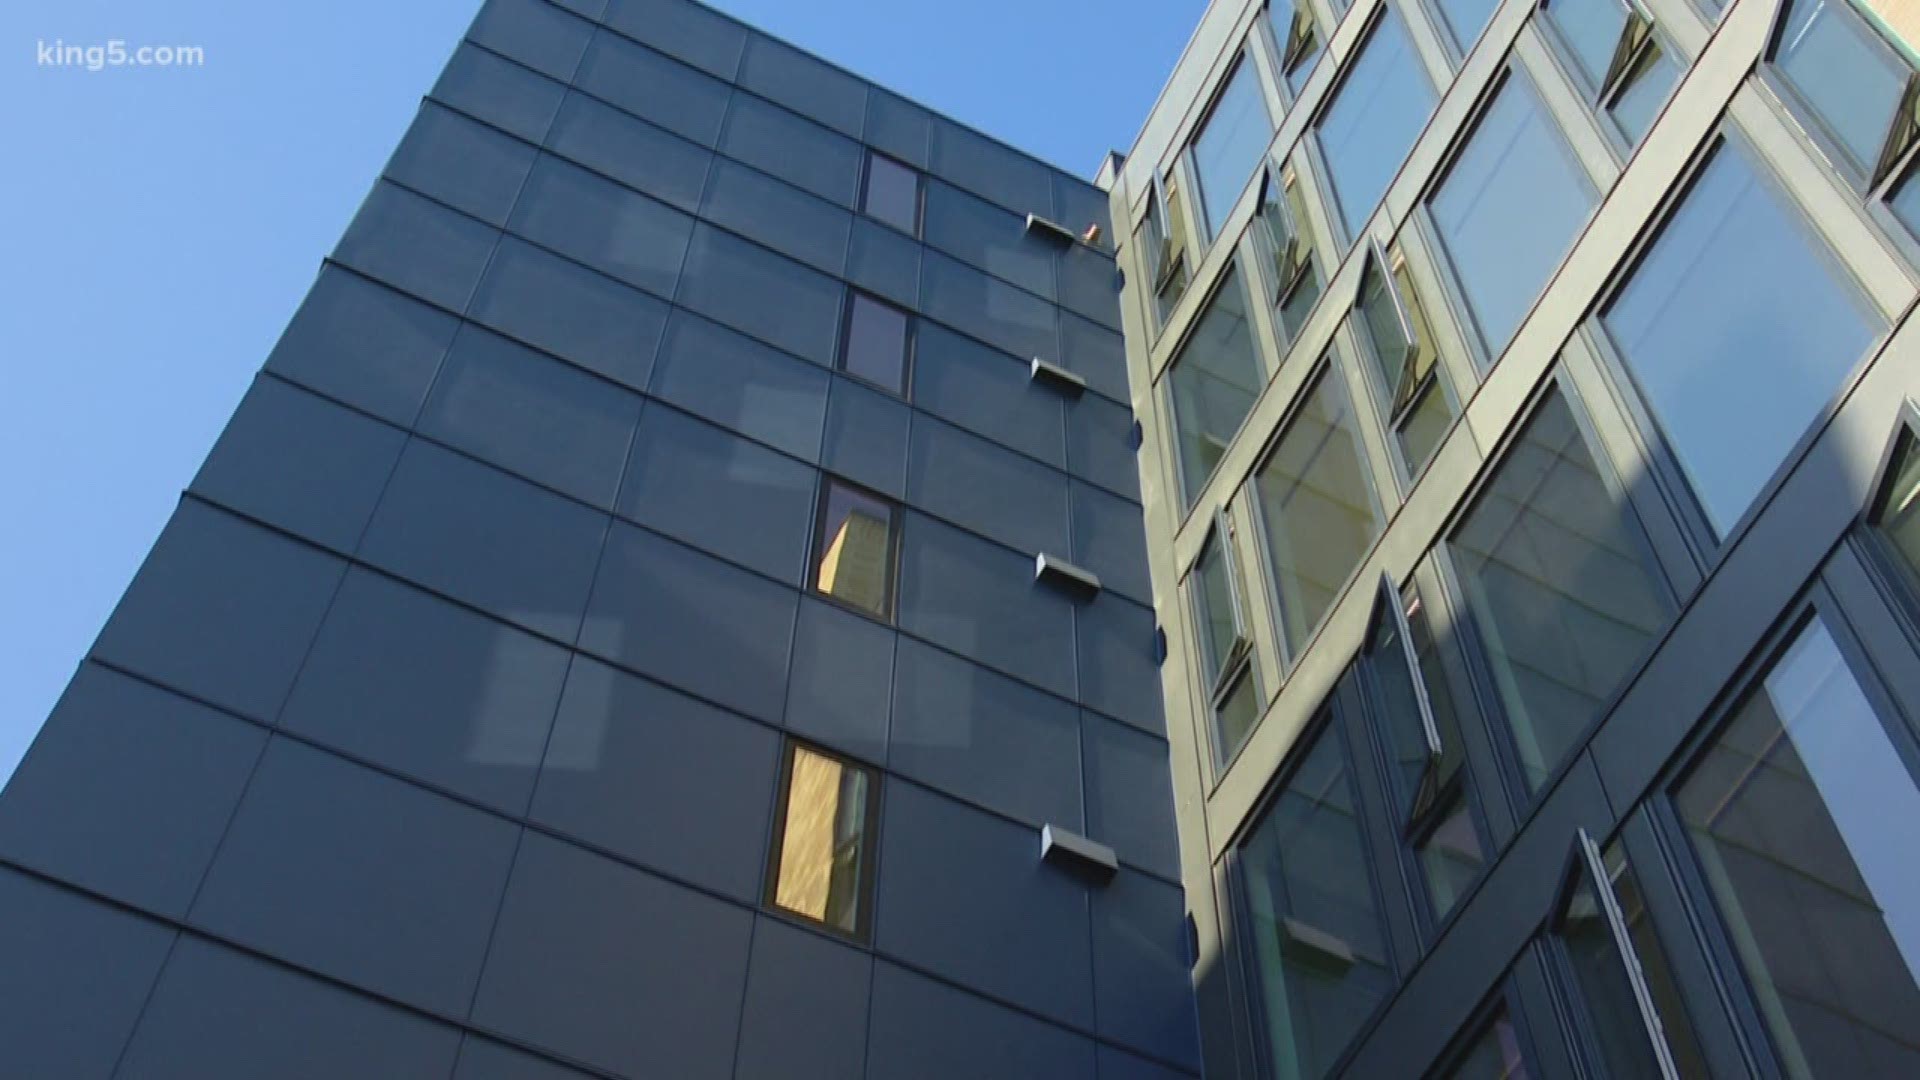 Building one project in the UW cost $40 million.  The average cost of an apartment unit in Seattle is $300,000.